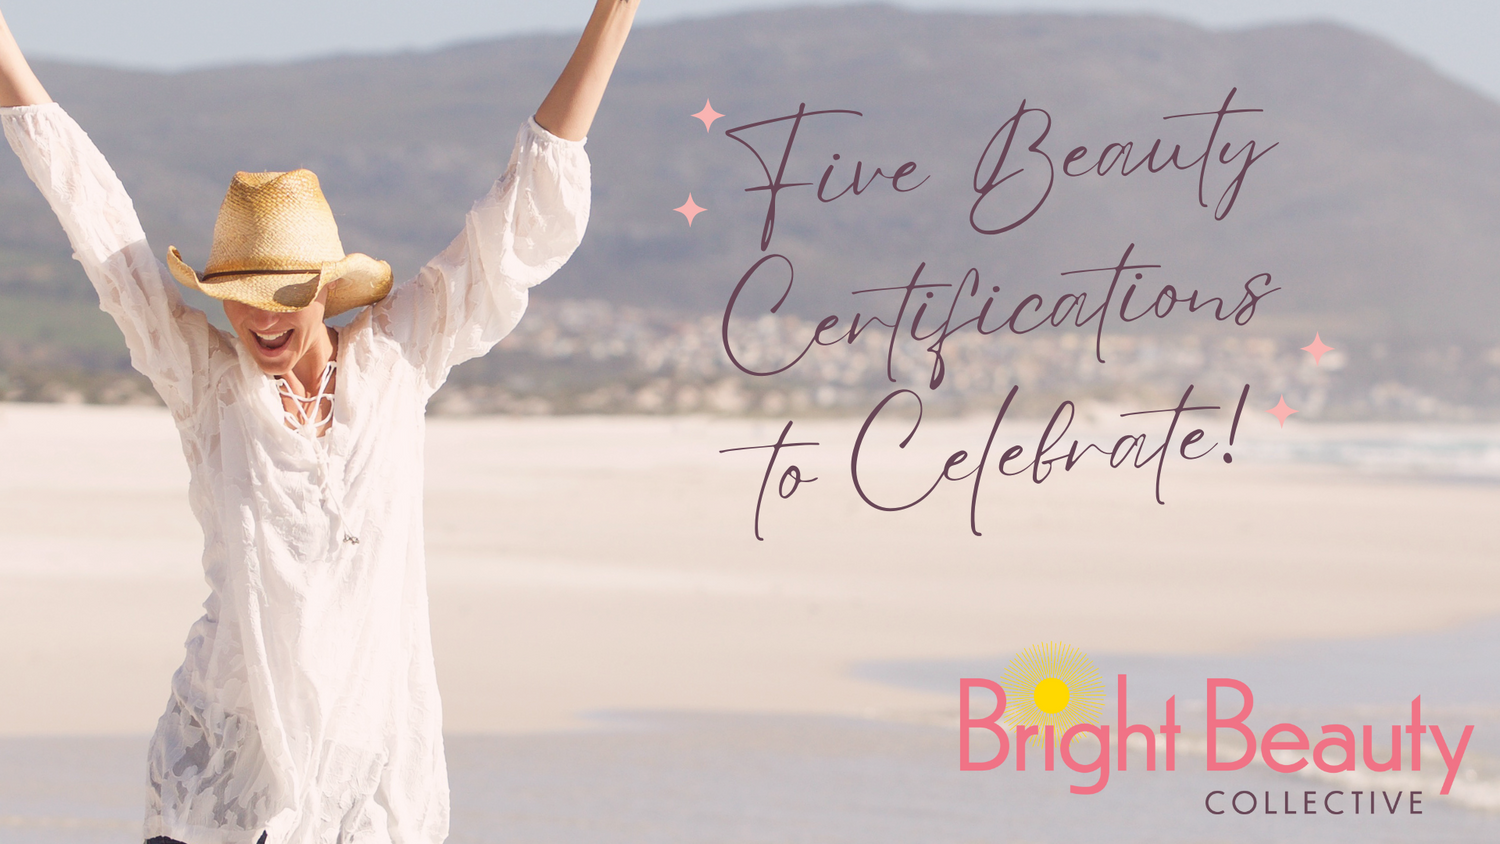 Five Beauty Certifications to Celebrate!